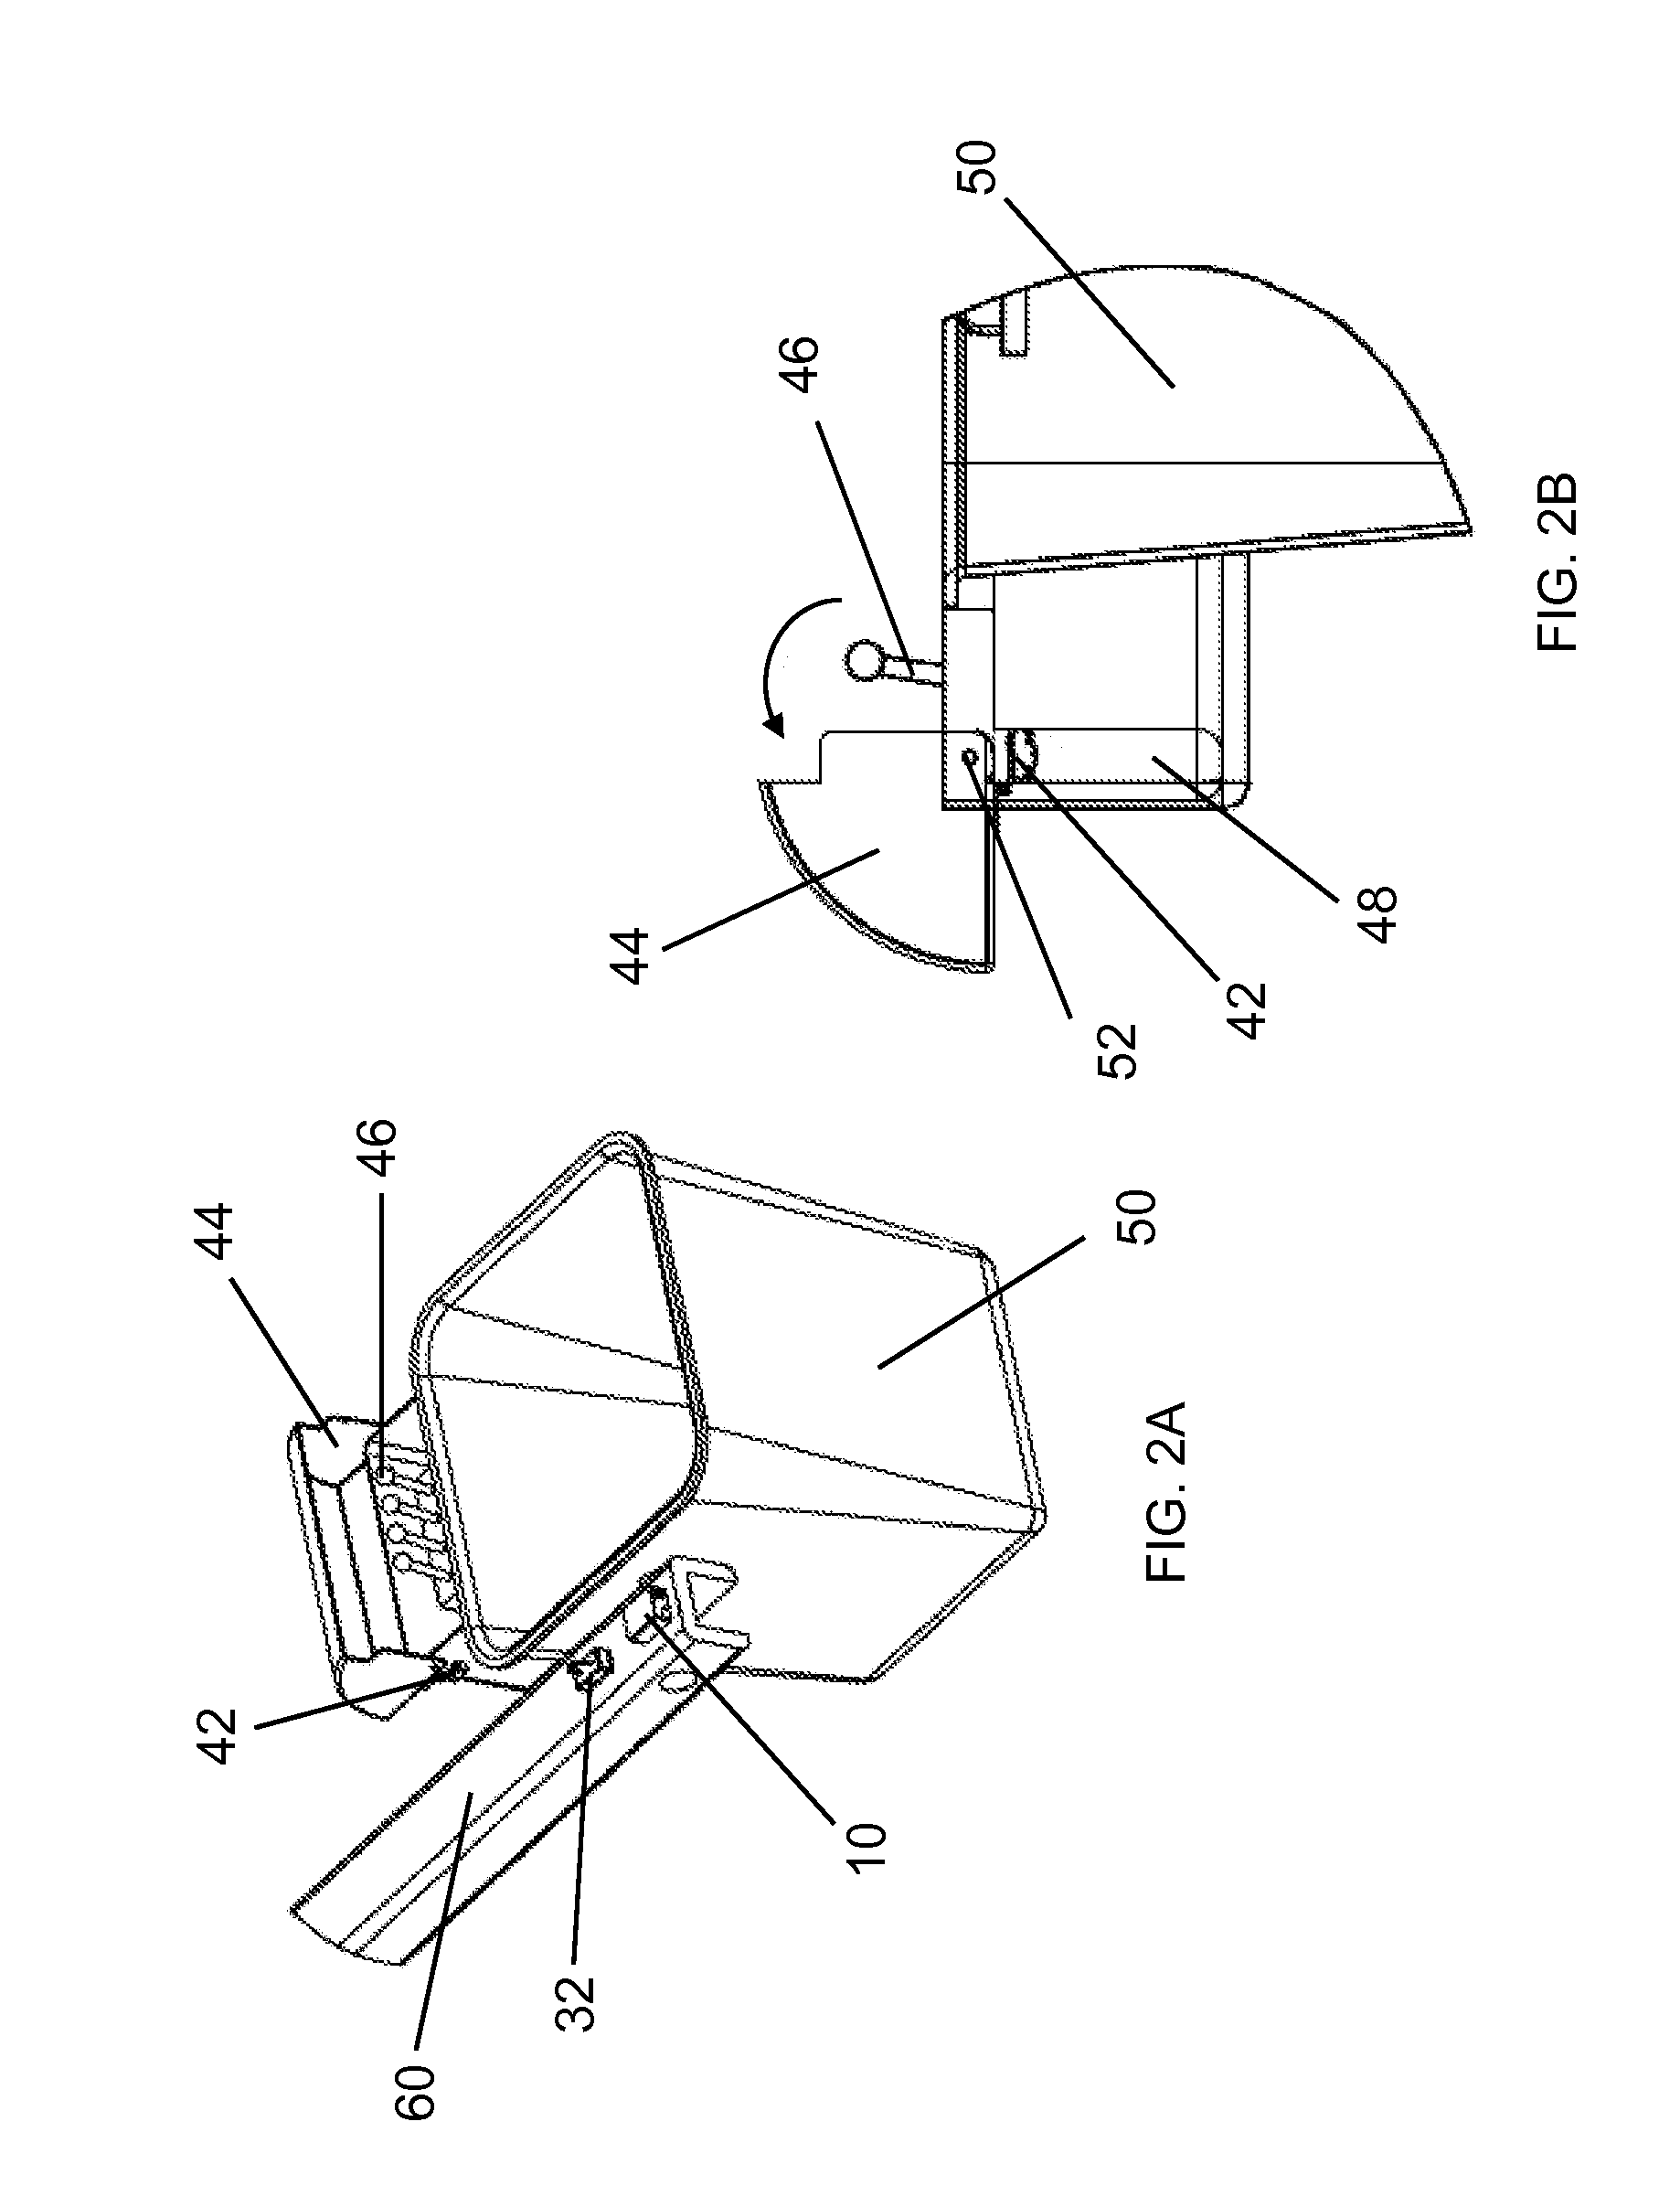 Detection and warning system utilizable in a fall arresting and prevention device and method of same